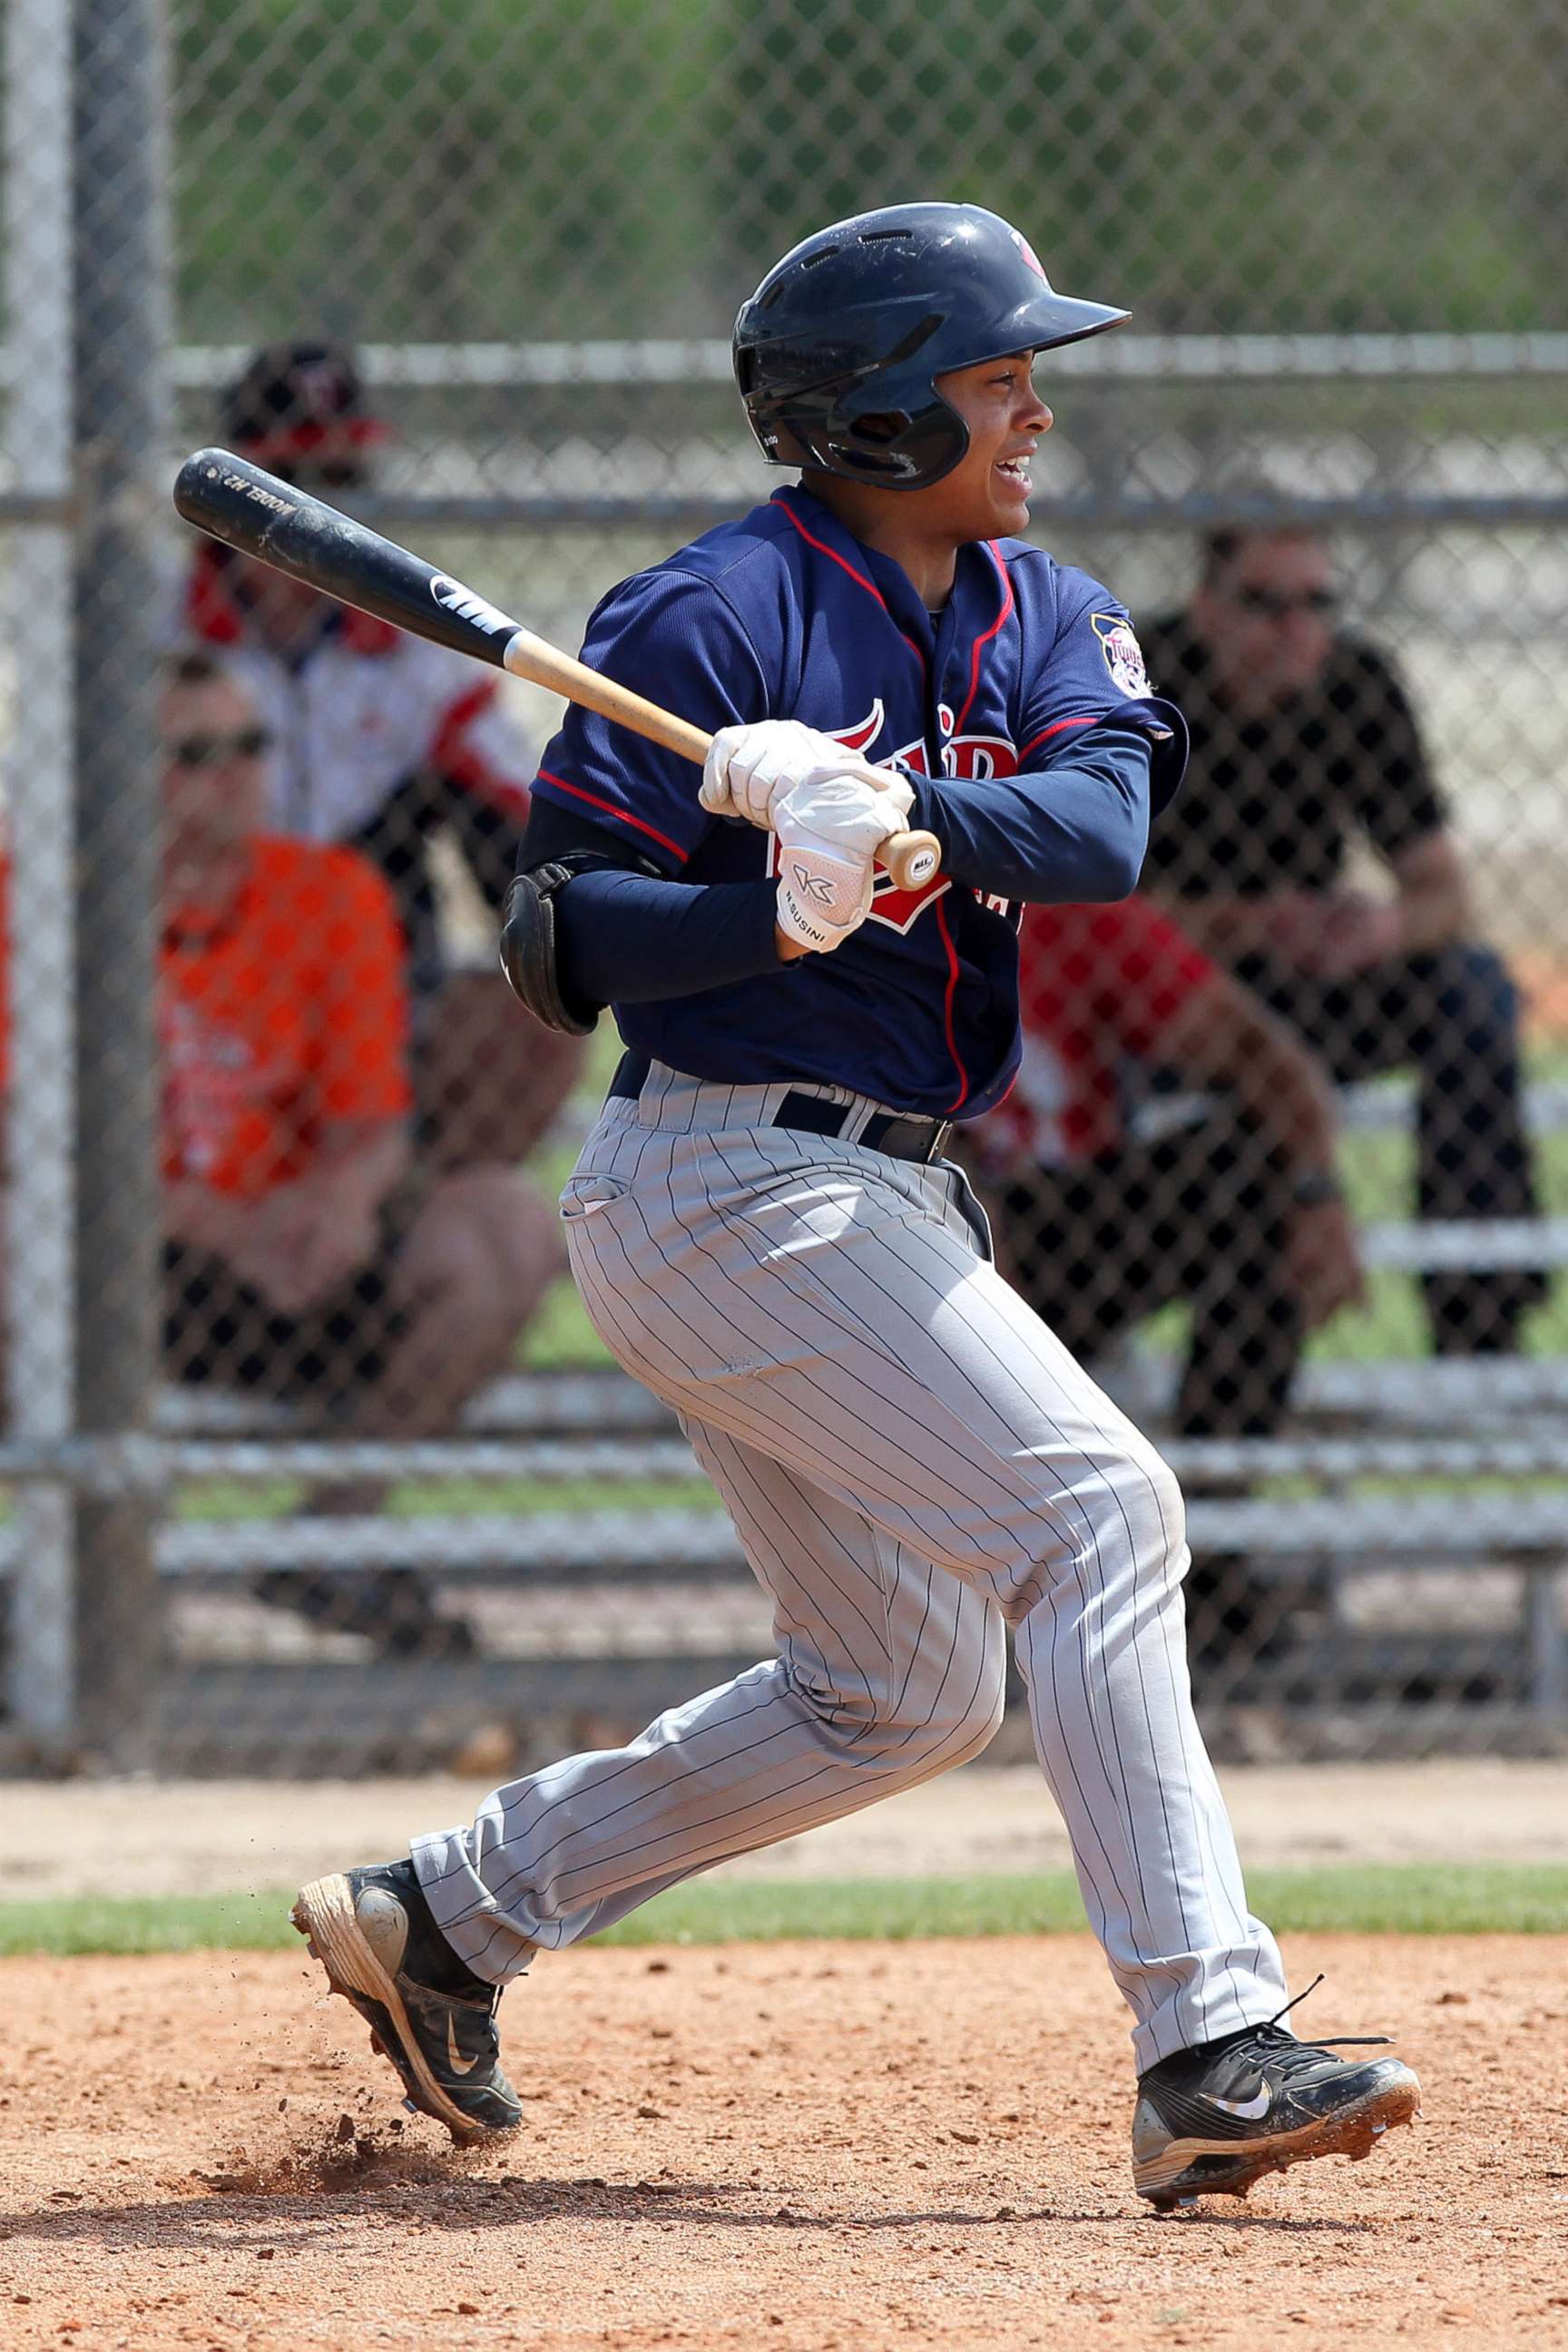 PHOTO: Minnesota Twins Norberto Susini bats during a minor league spring training game on March 25, 2012 in Fort Myers, Fla.